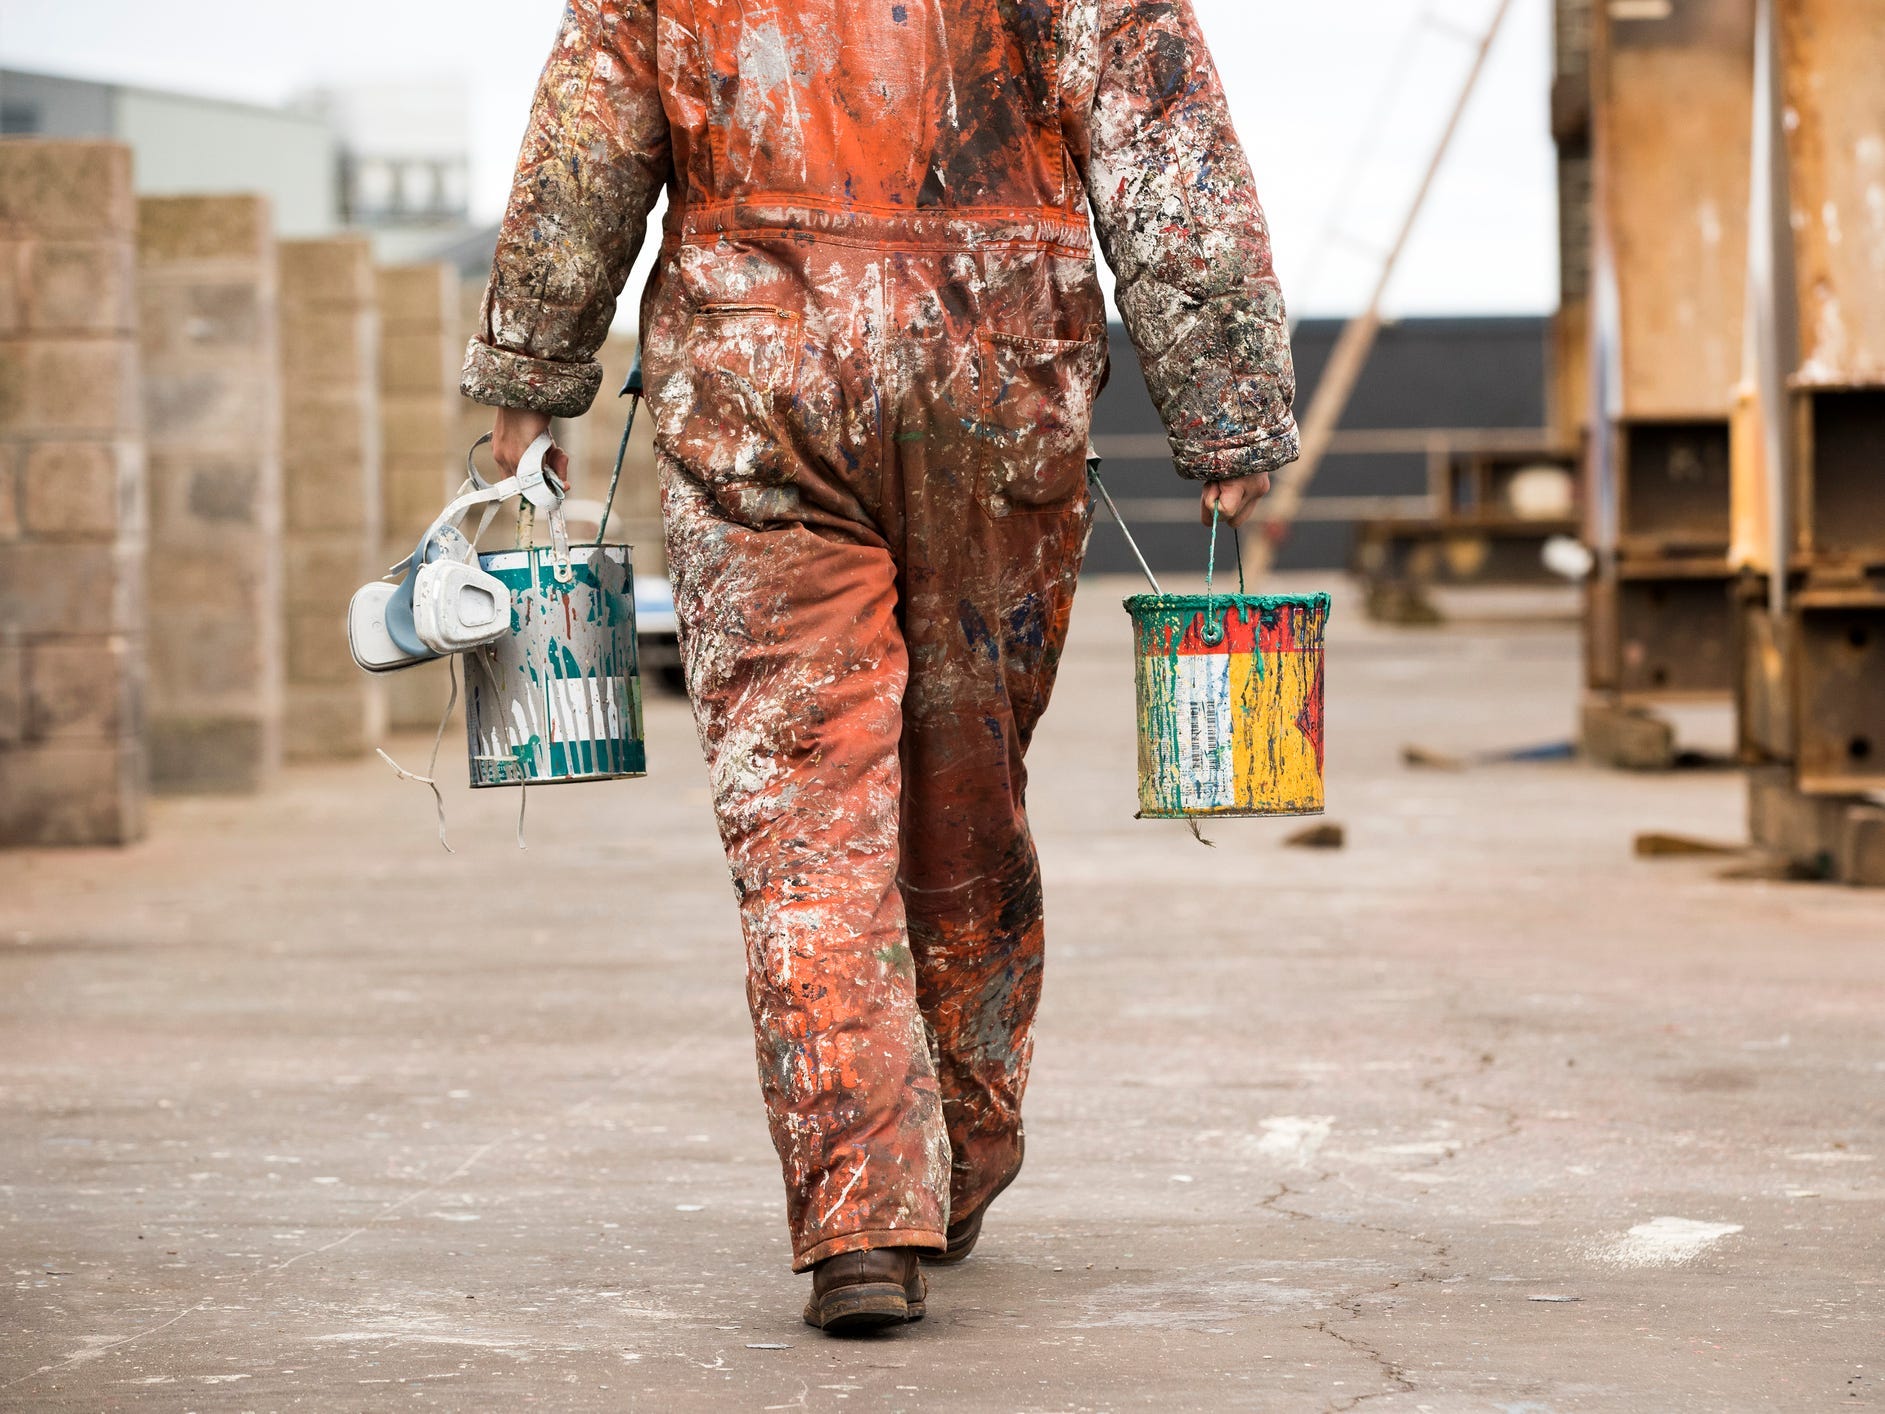 A person in an orange paint-covered jumpsuit carrying two paint cans